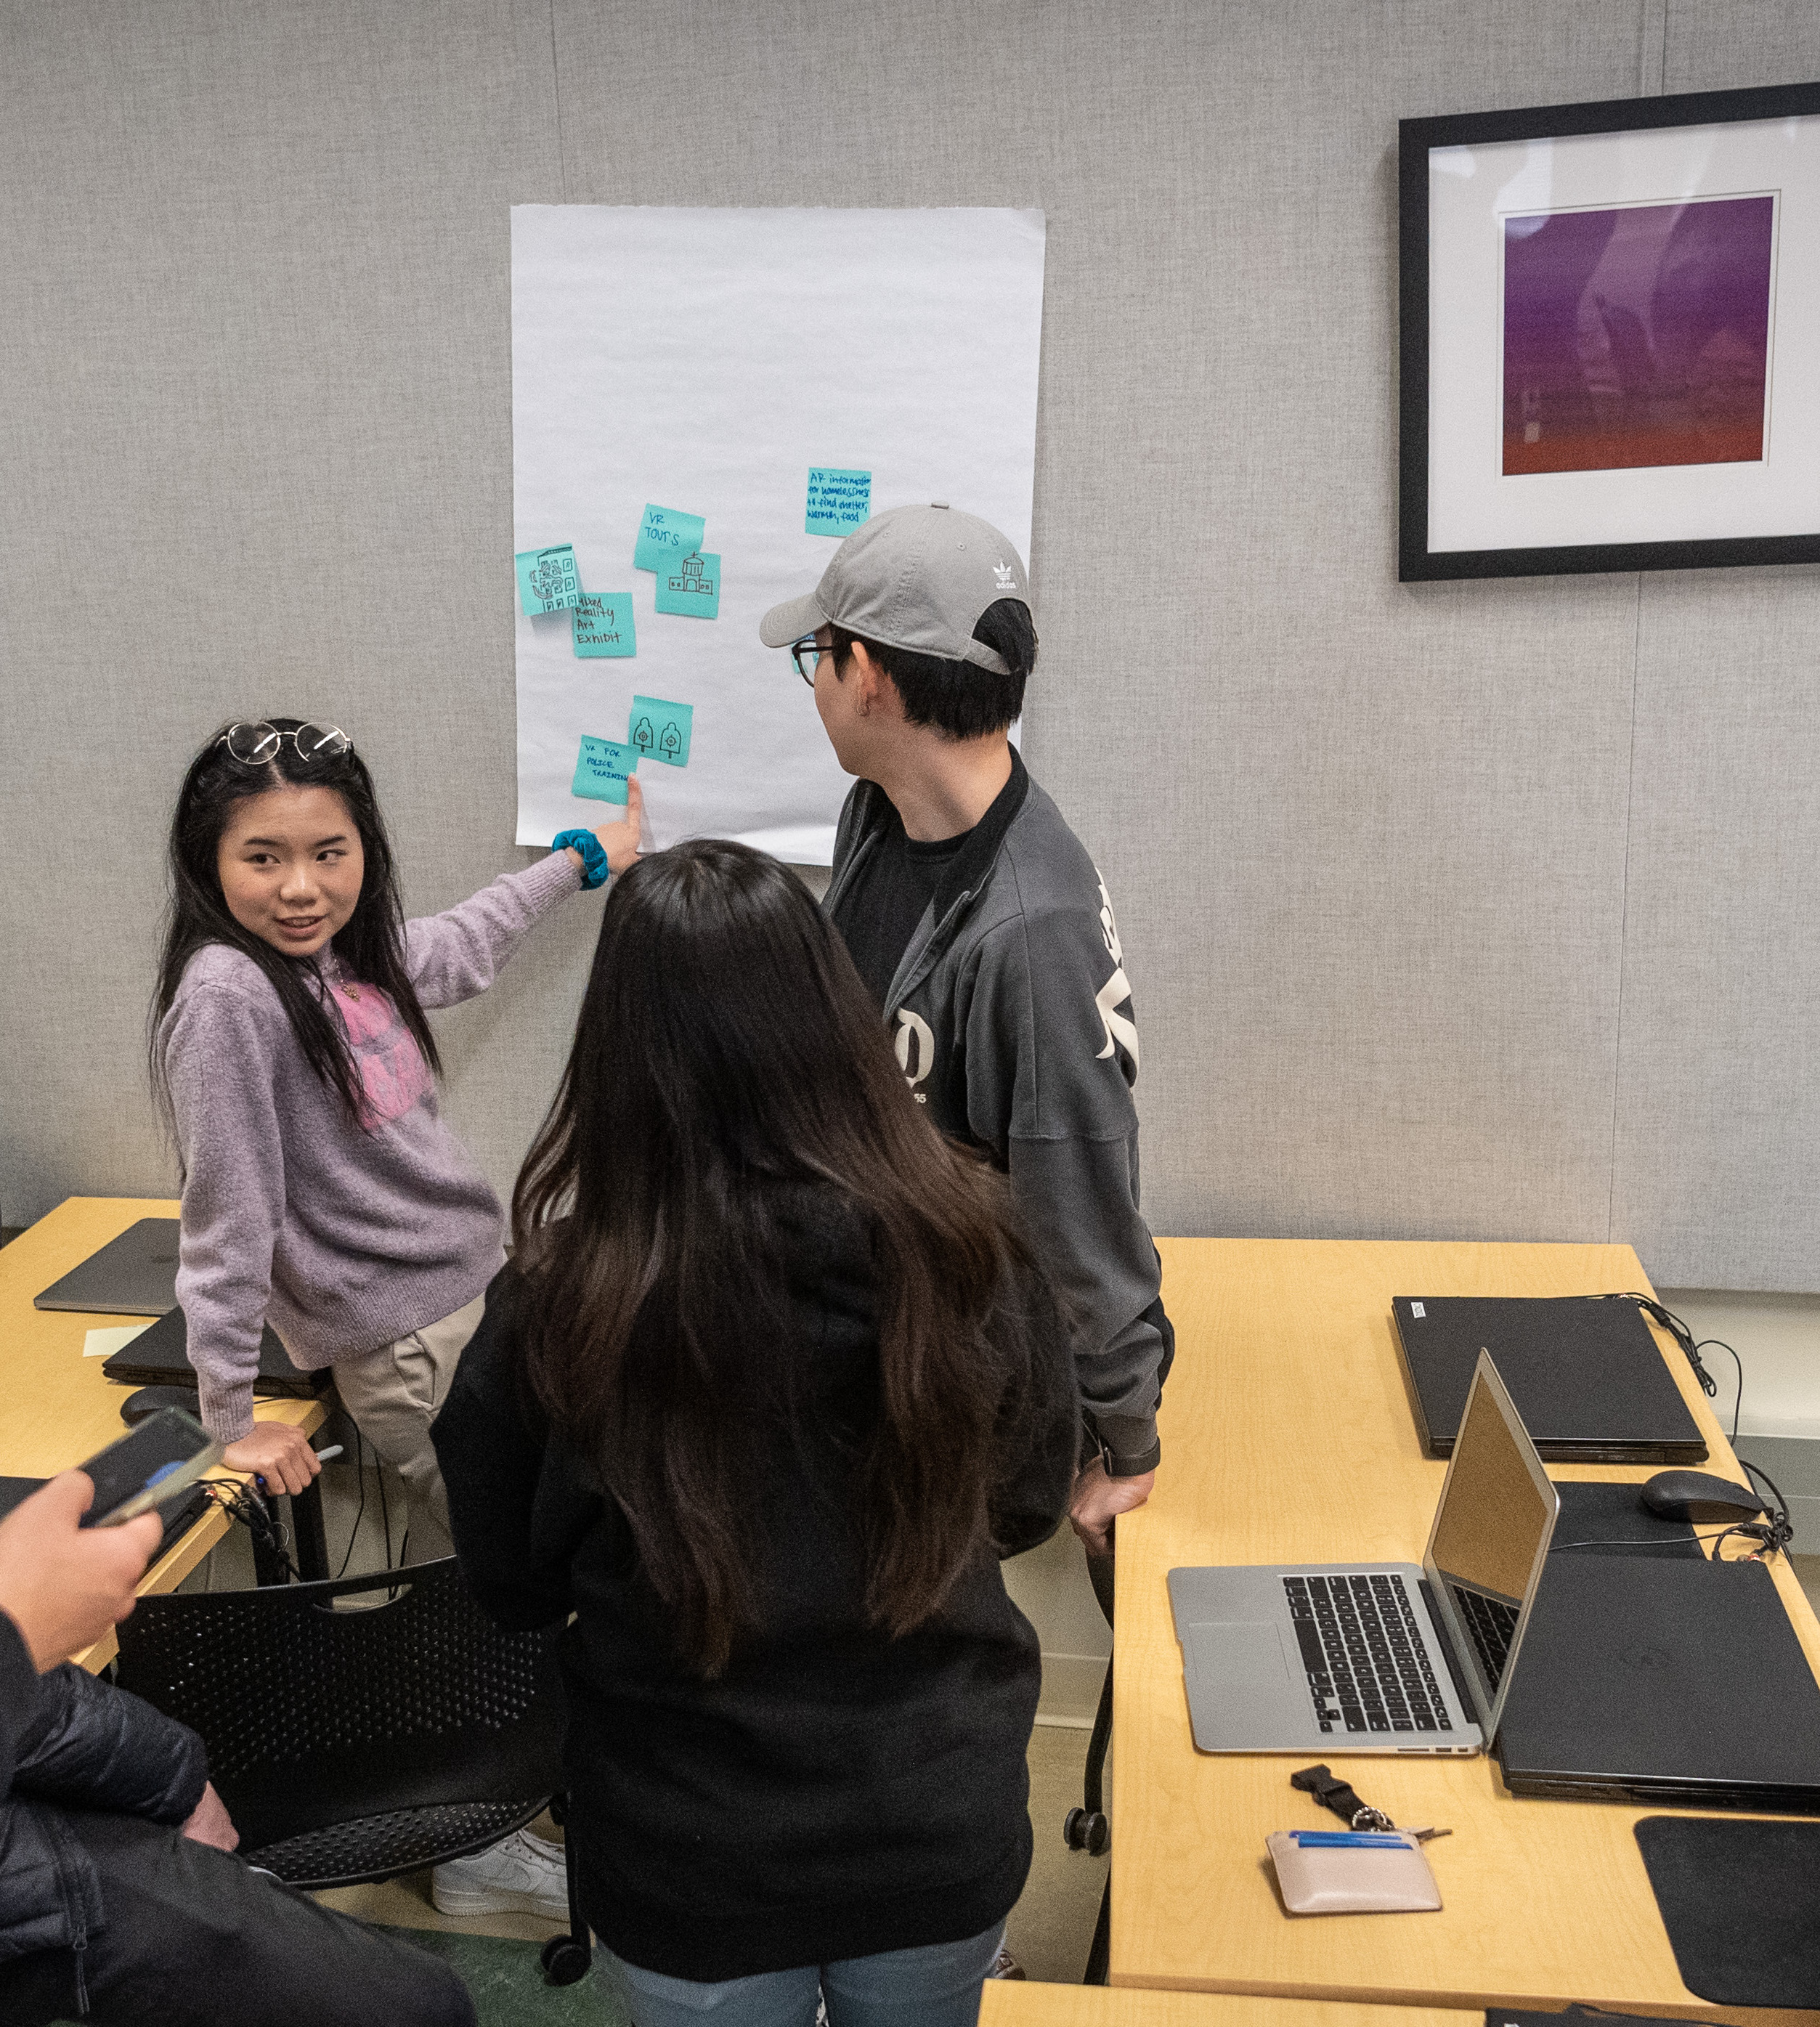 Students work on a developing an AI-powered solution to an issue in their communities.